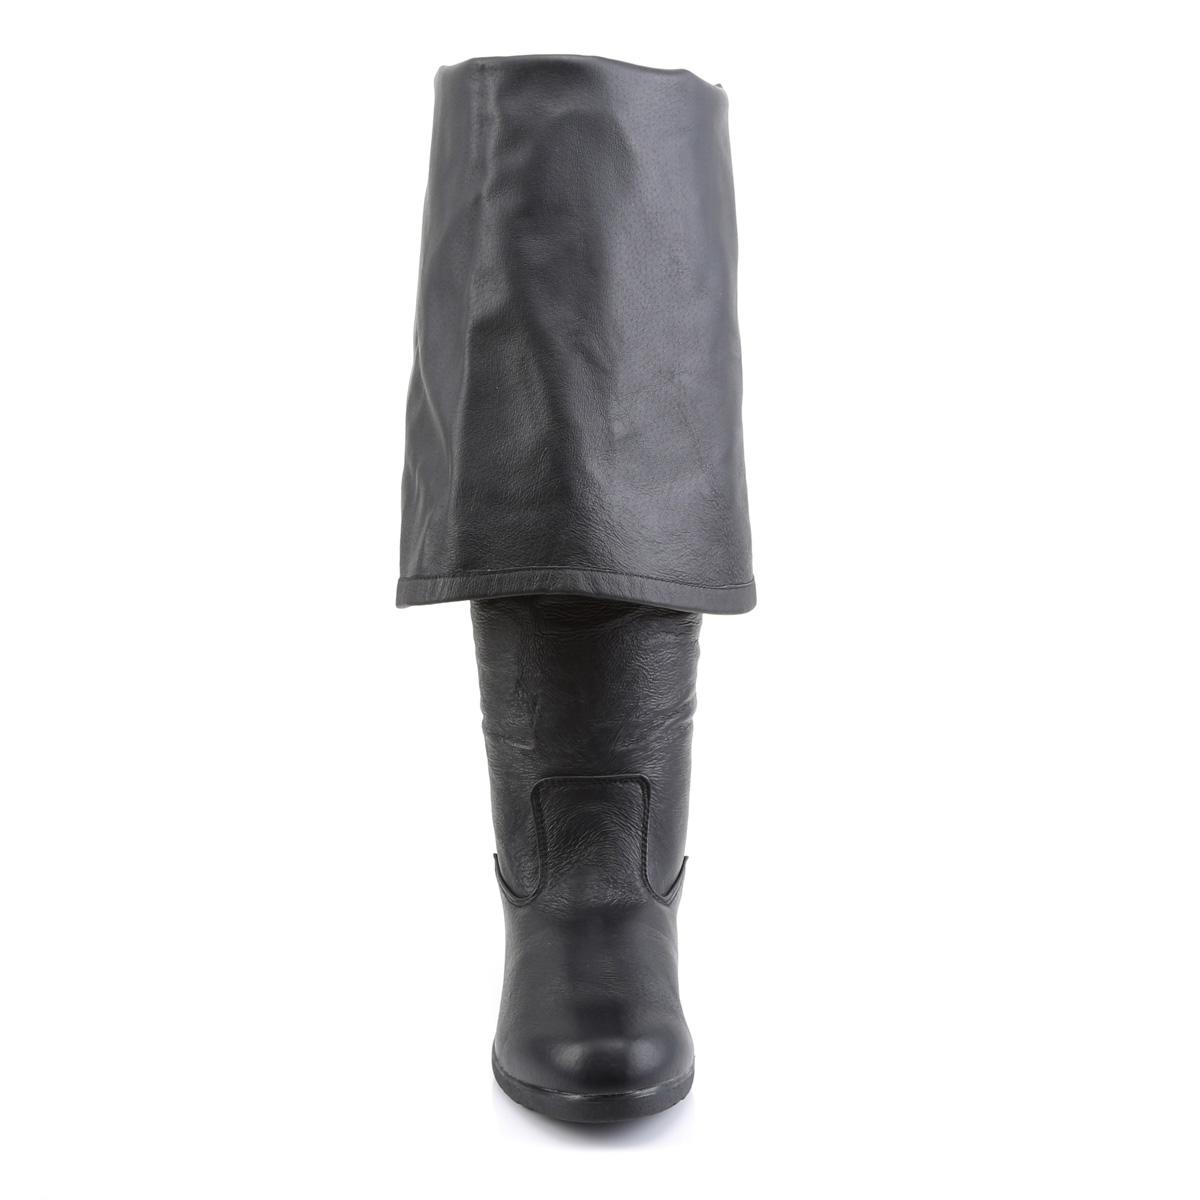 Pirate Thigh Boot front view